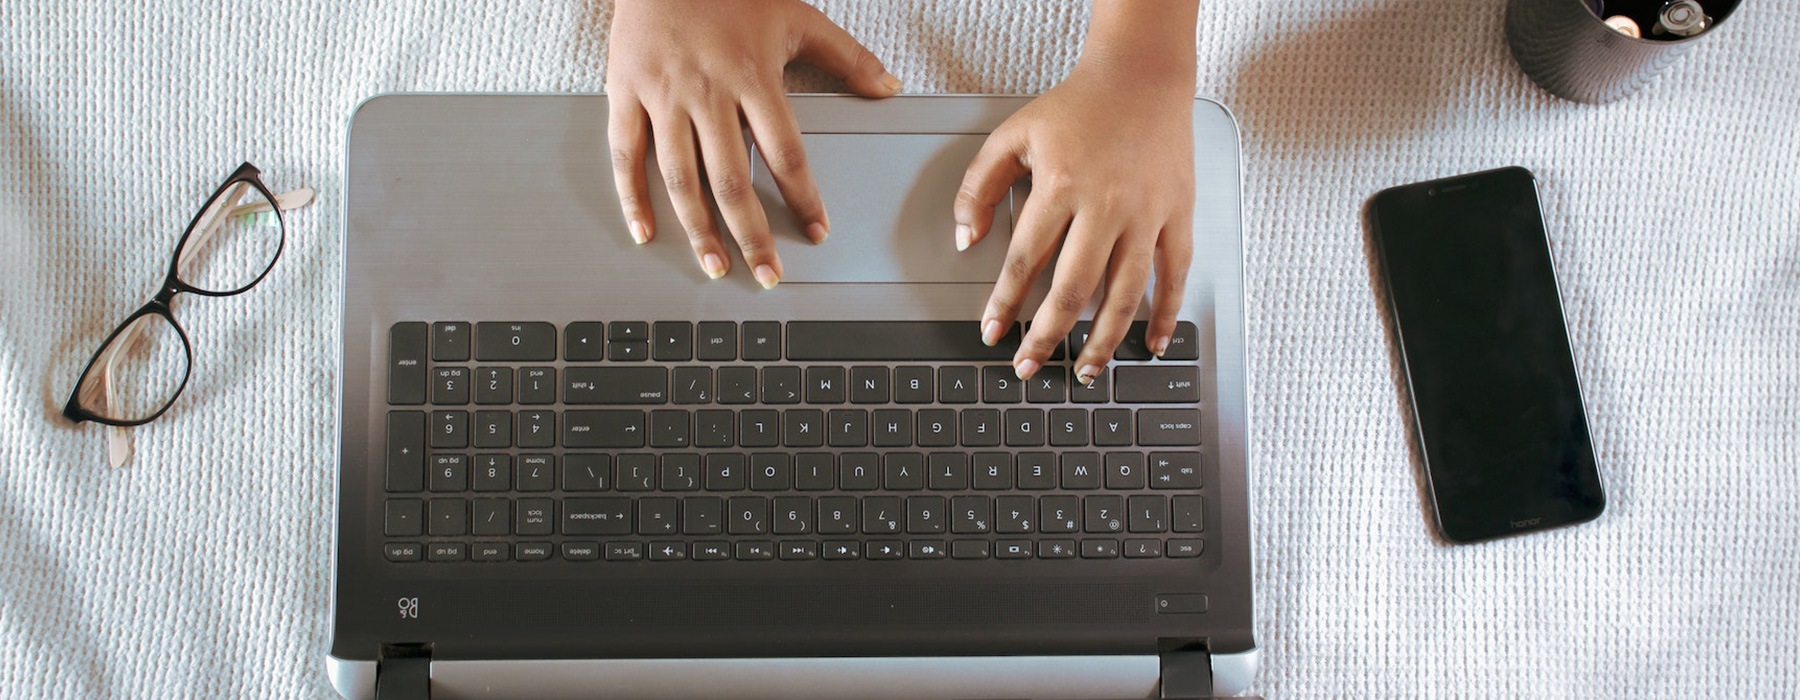 overhead view of a person typing on a laptop